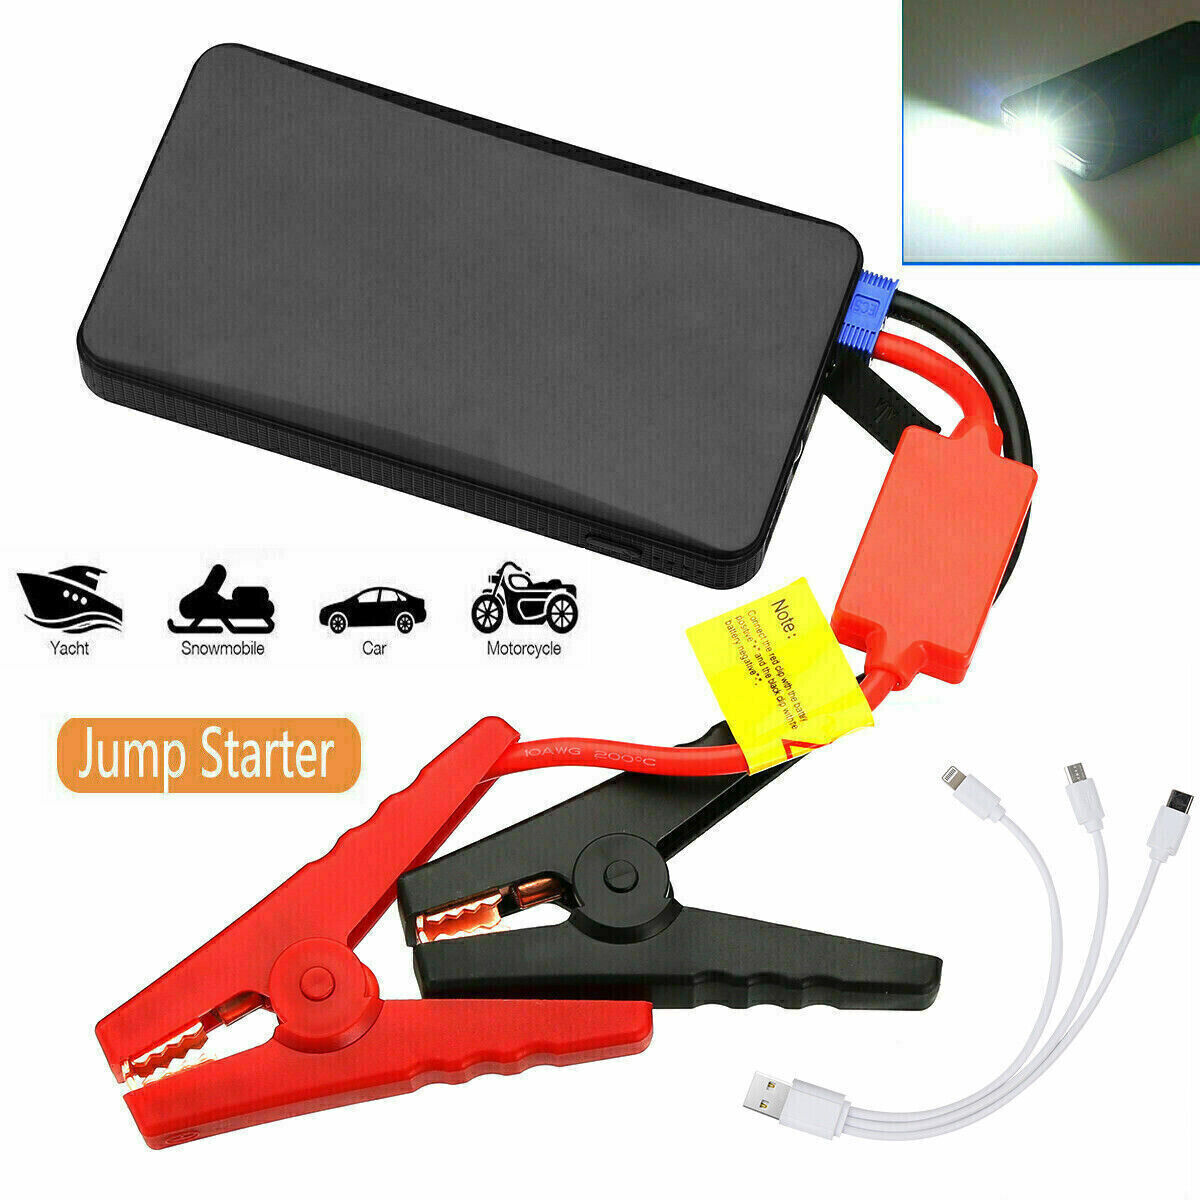 Booster Jumper Box Power Bank Battery Charger Durable